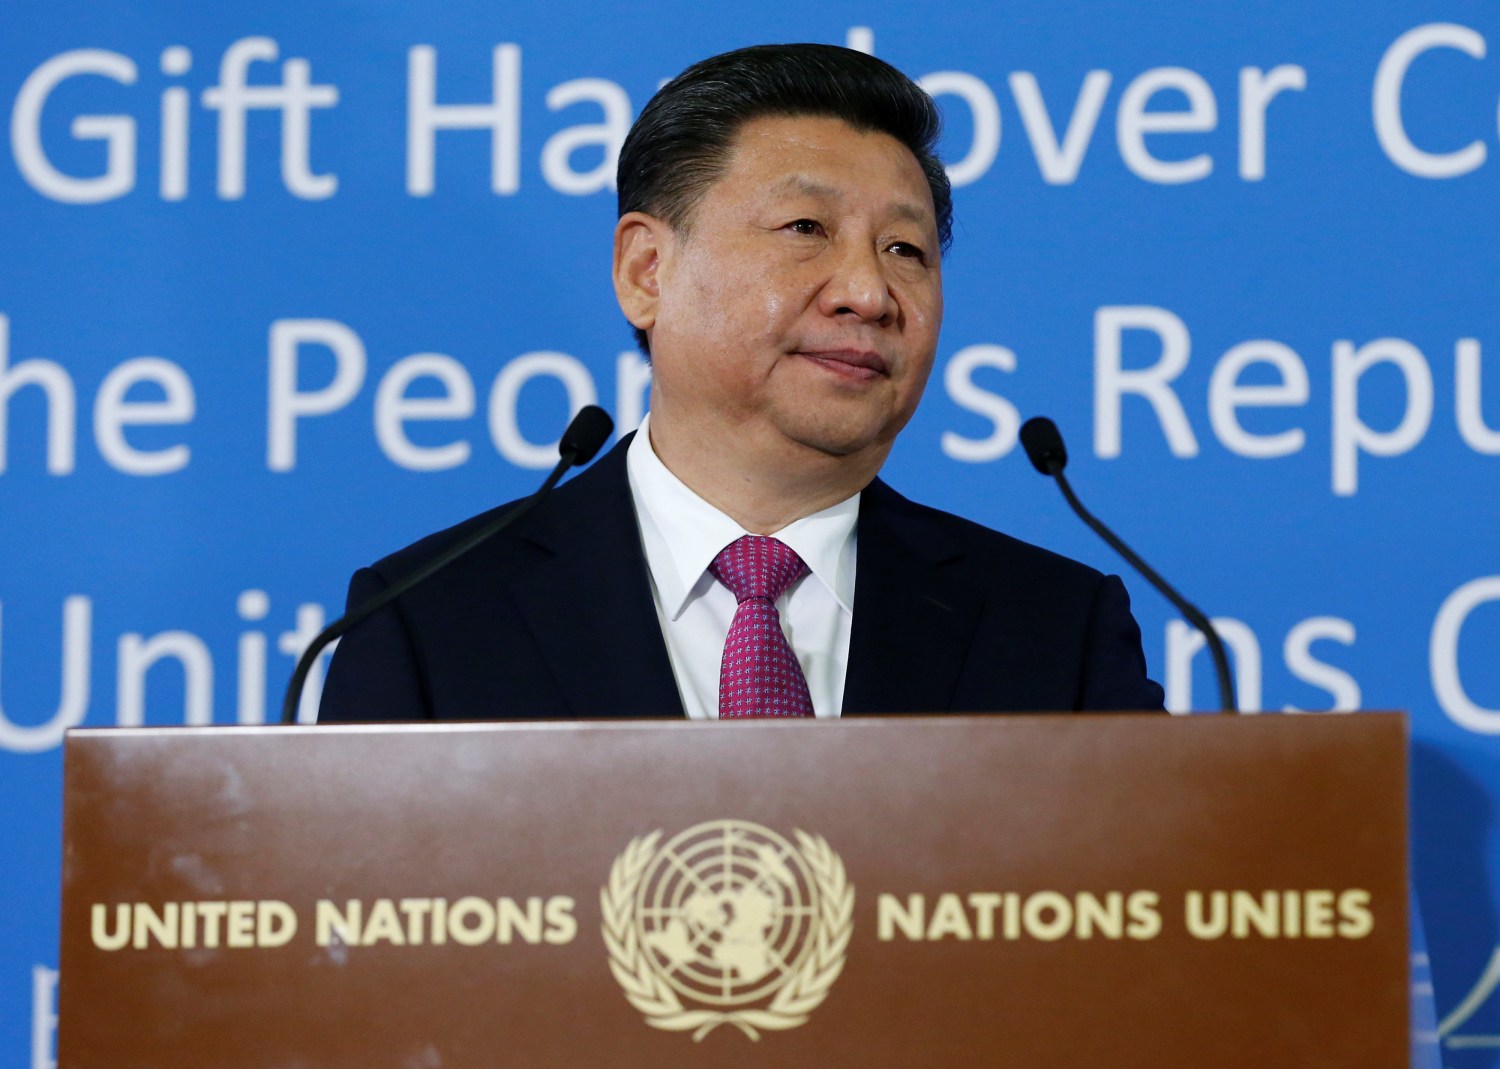 Chinese President Xi Jinping addresses the guests during a gift handover ceremony at the United Nations European headquarters in Geneva, Switzerland, January 18, 2017. REUTERS/Denis Balibouse